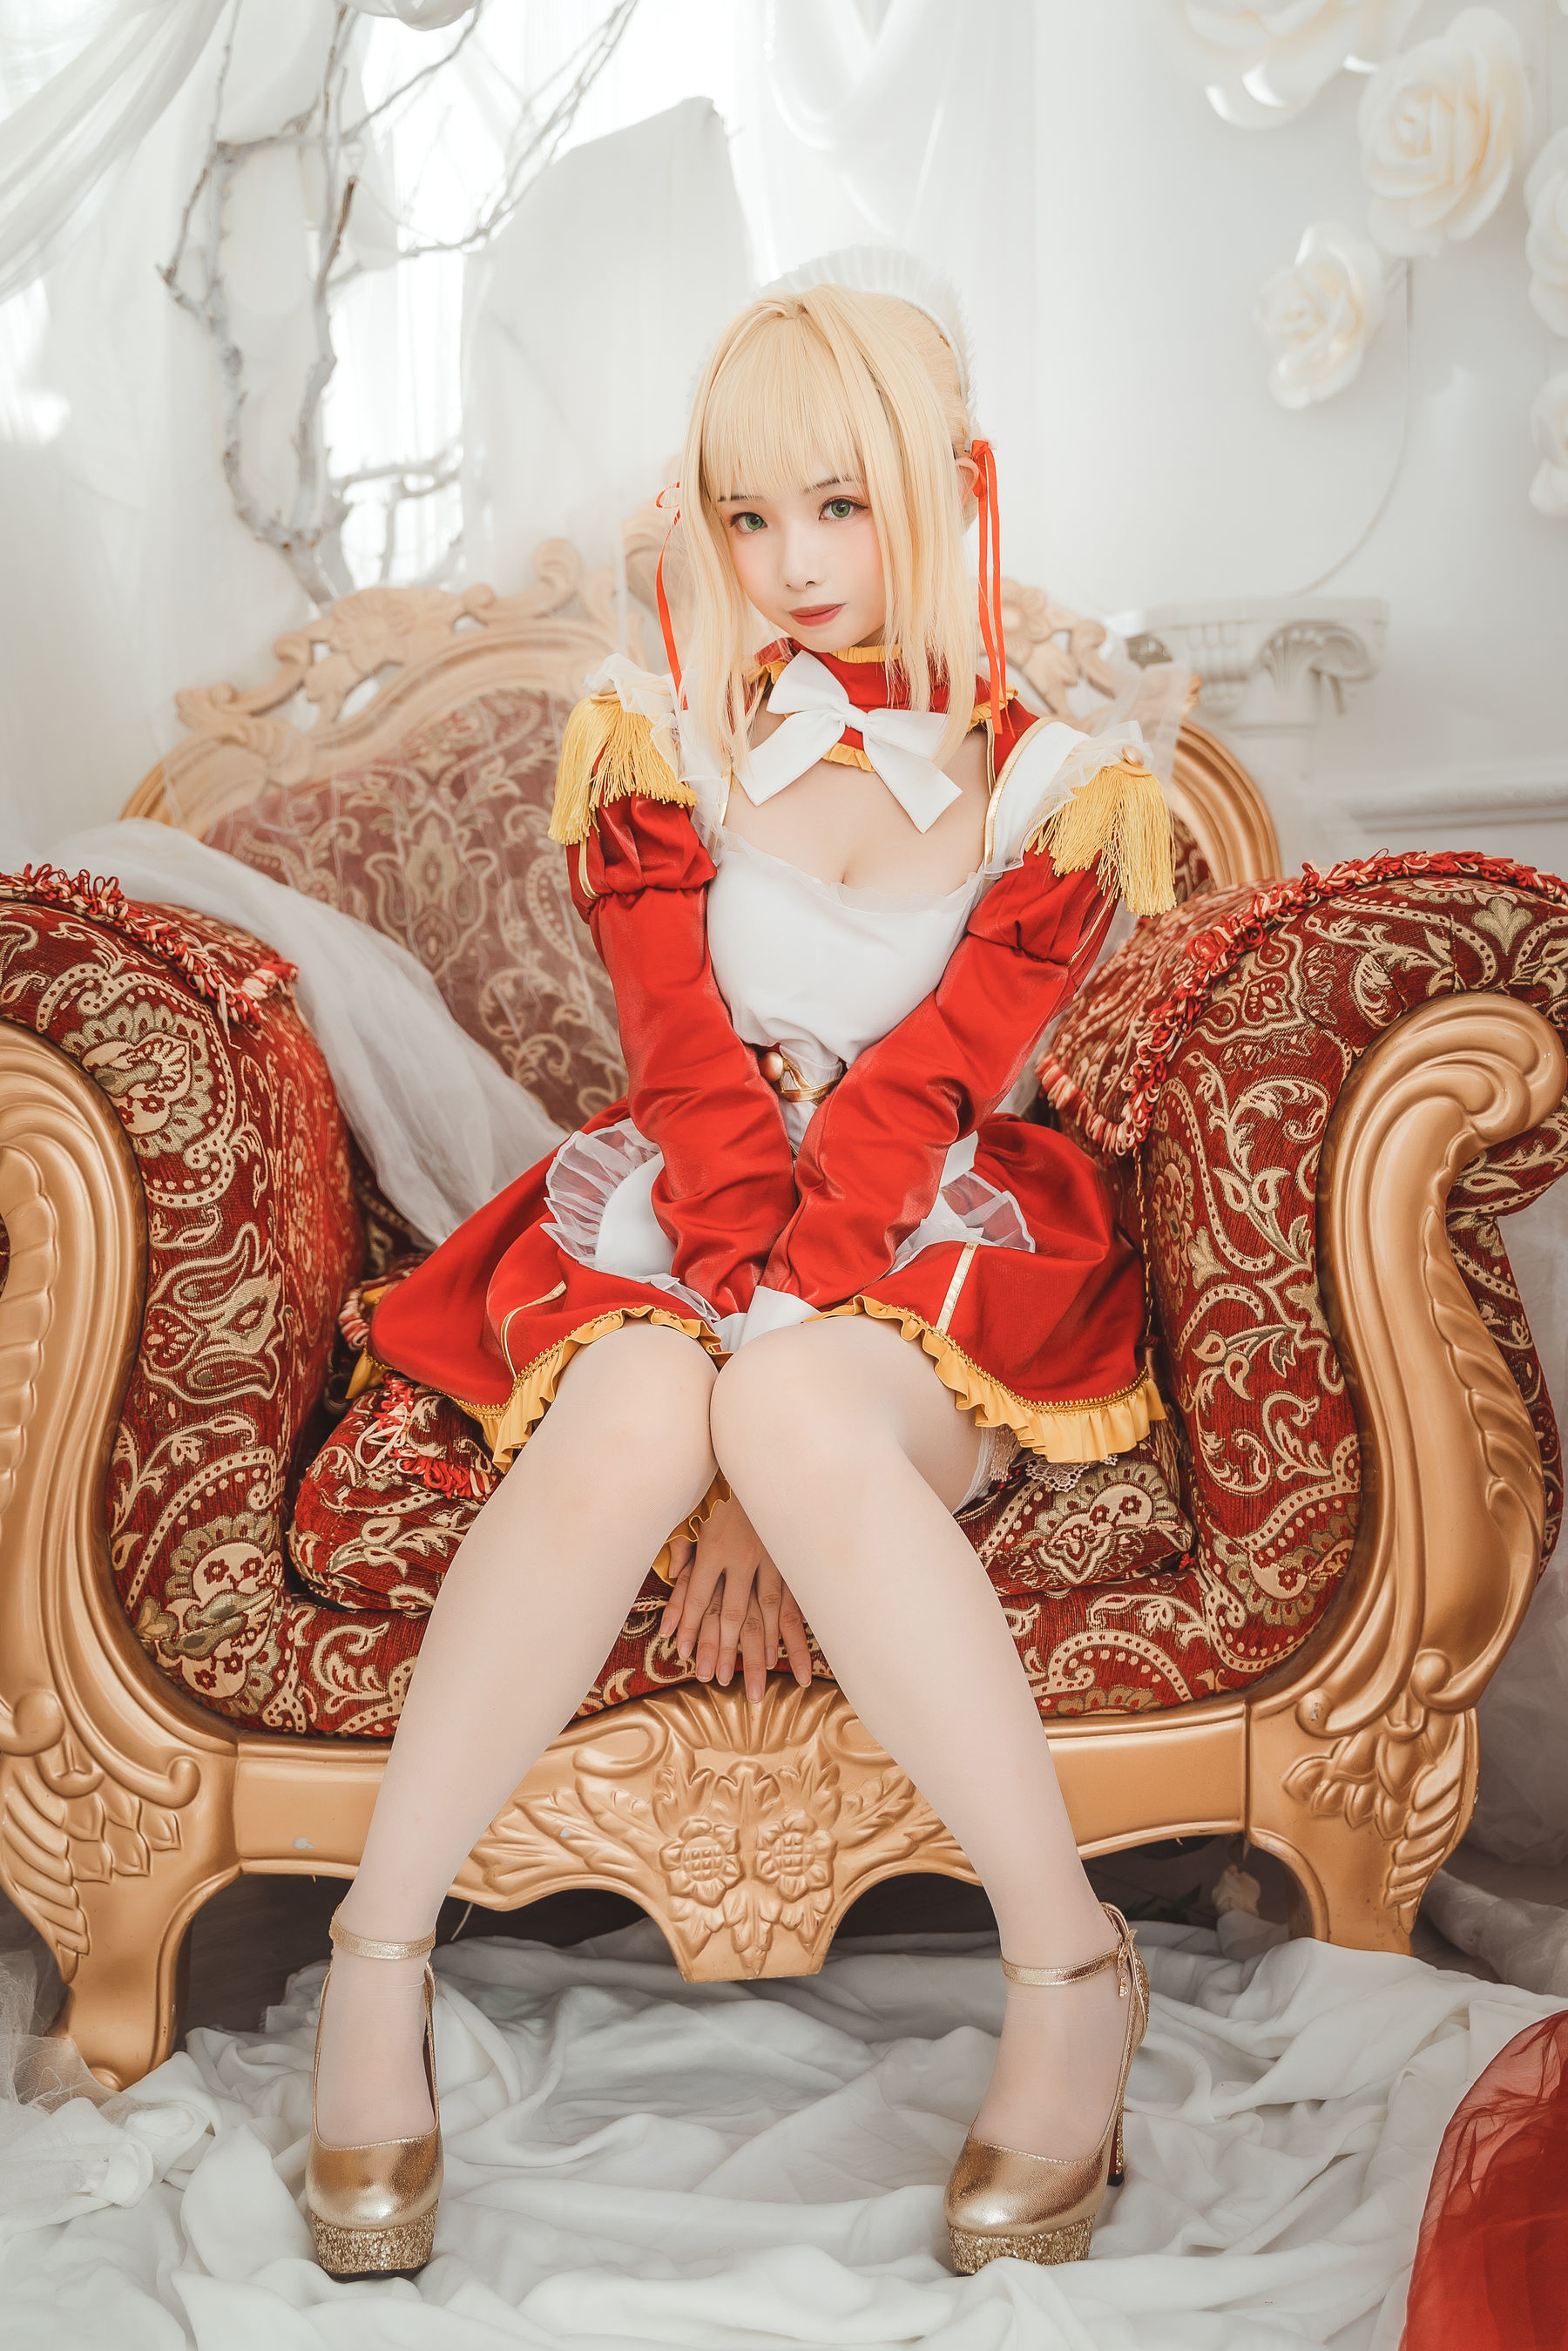 [Beauty Coser] Wenmei "The Maid of Nero" Page 6 No.fbb3e1